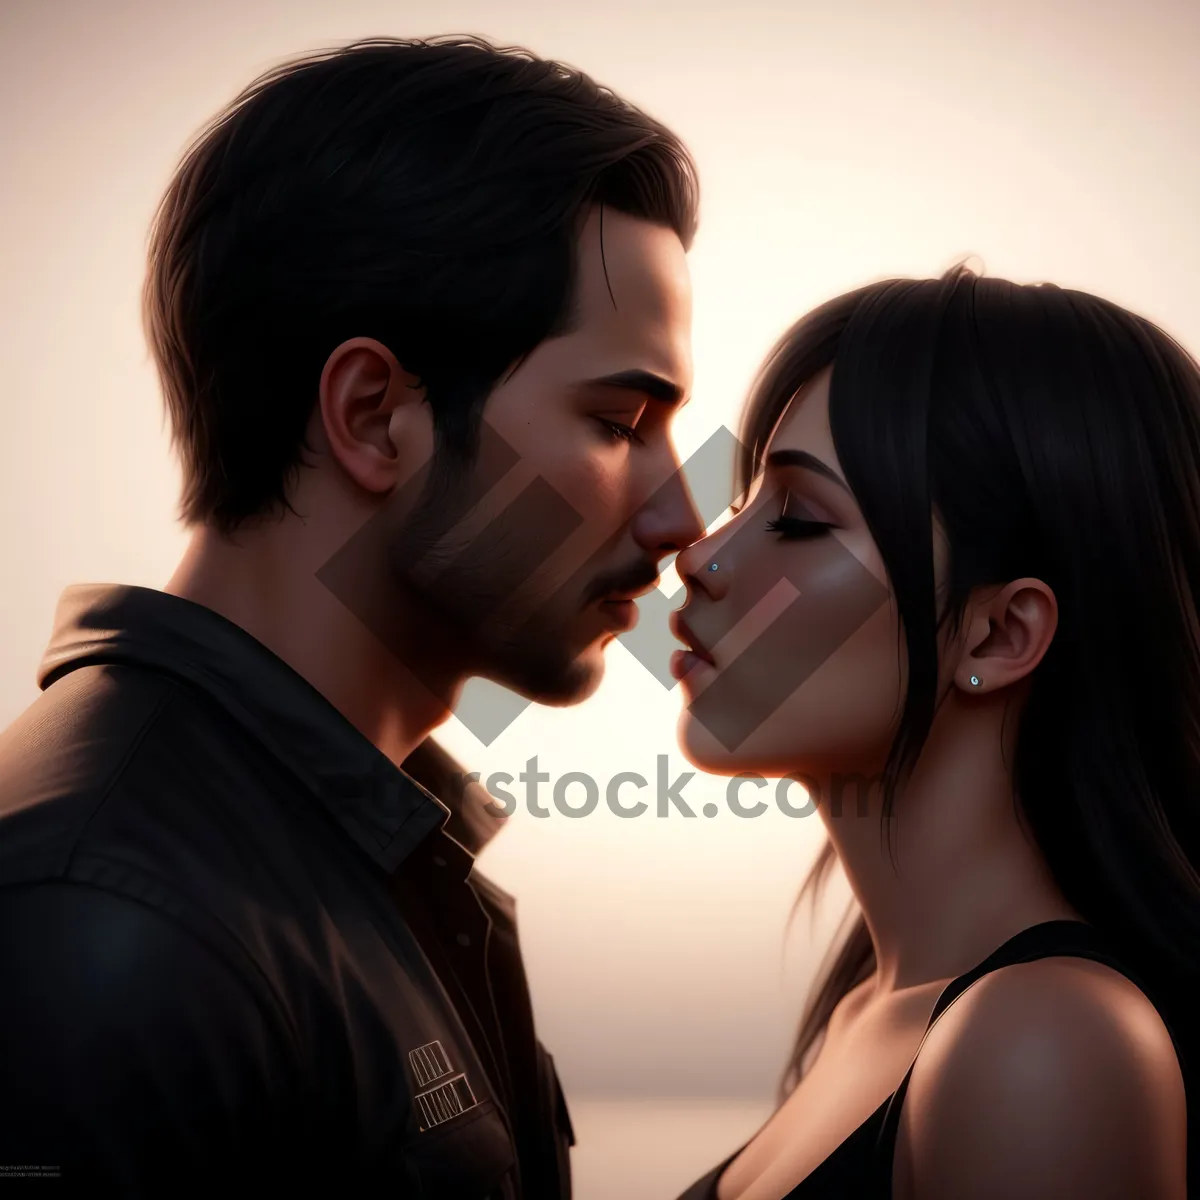 Picture of Happy Couple Embracing in Romantic Portrait